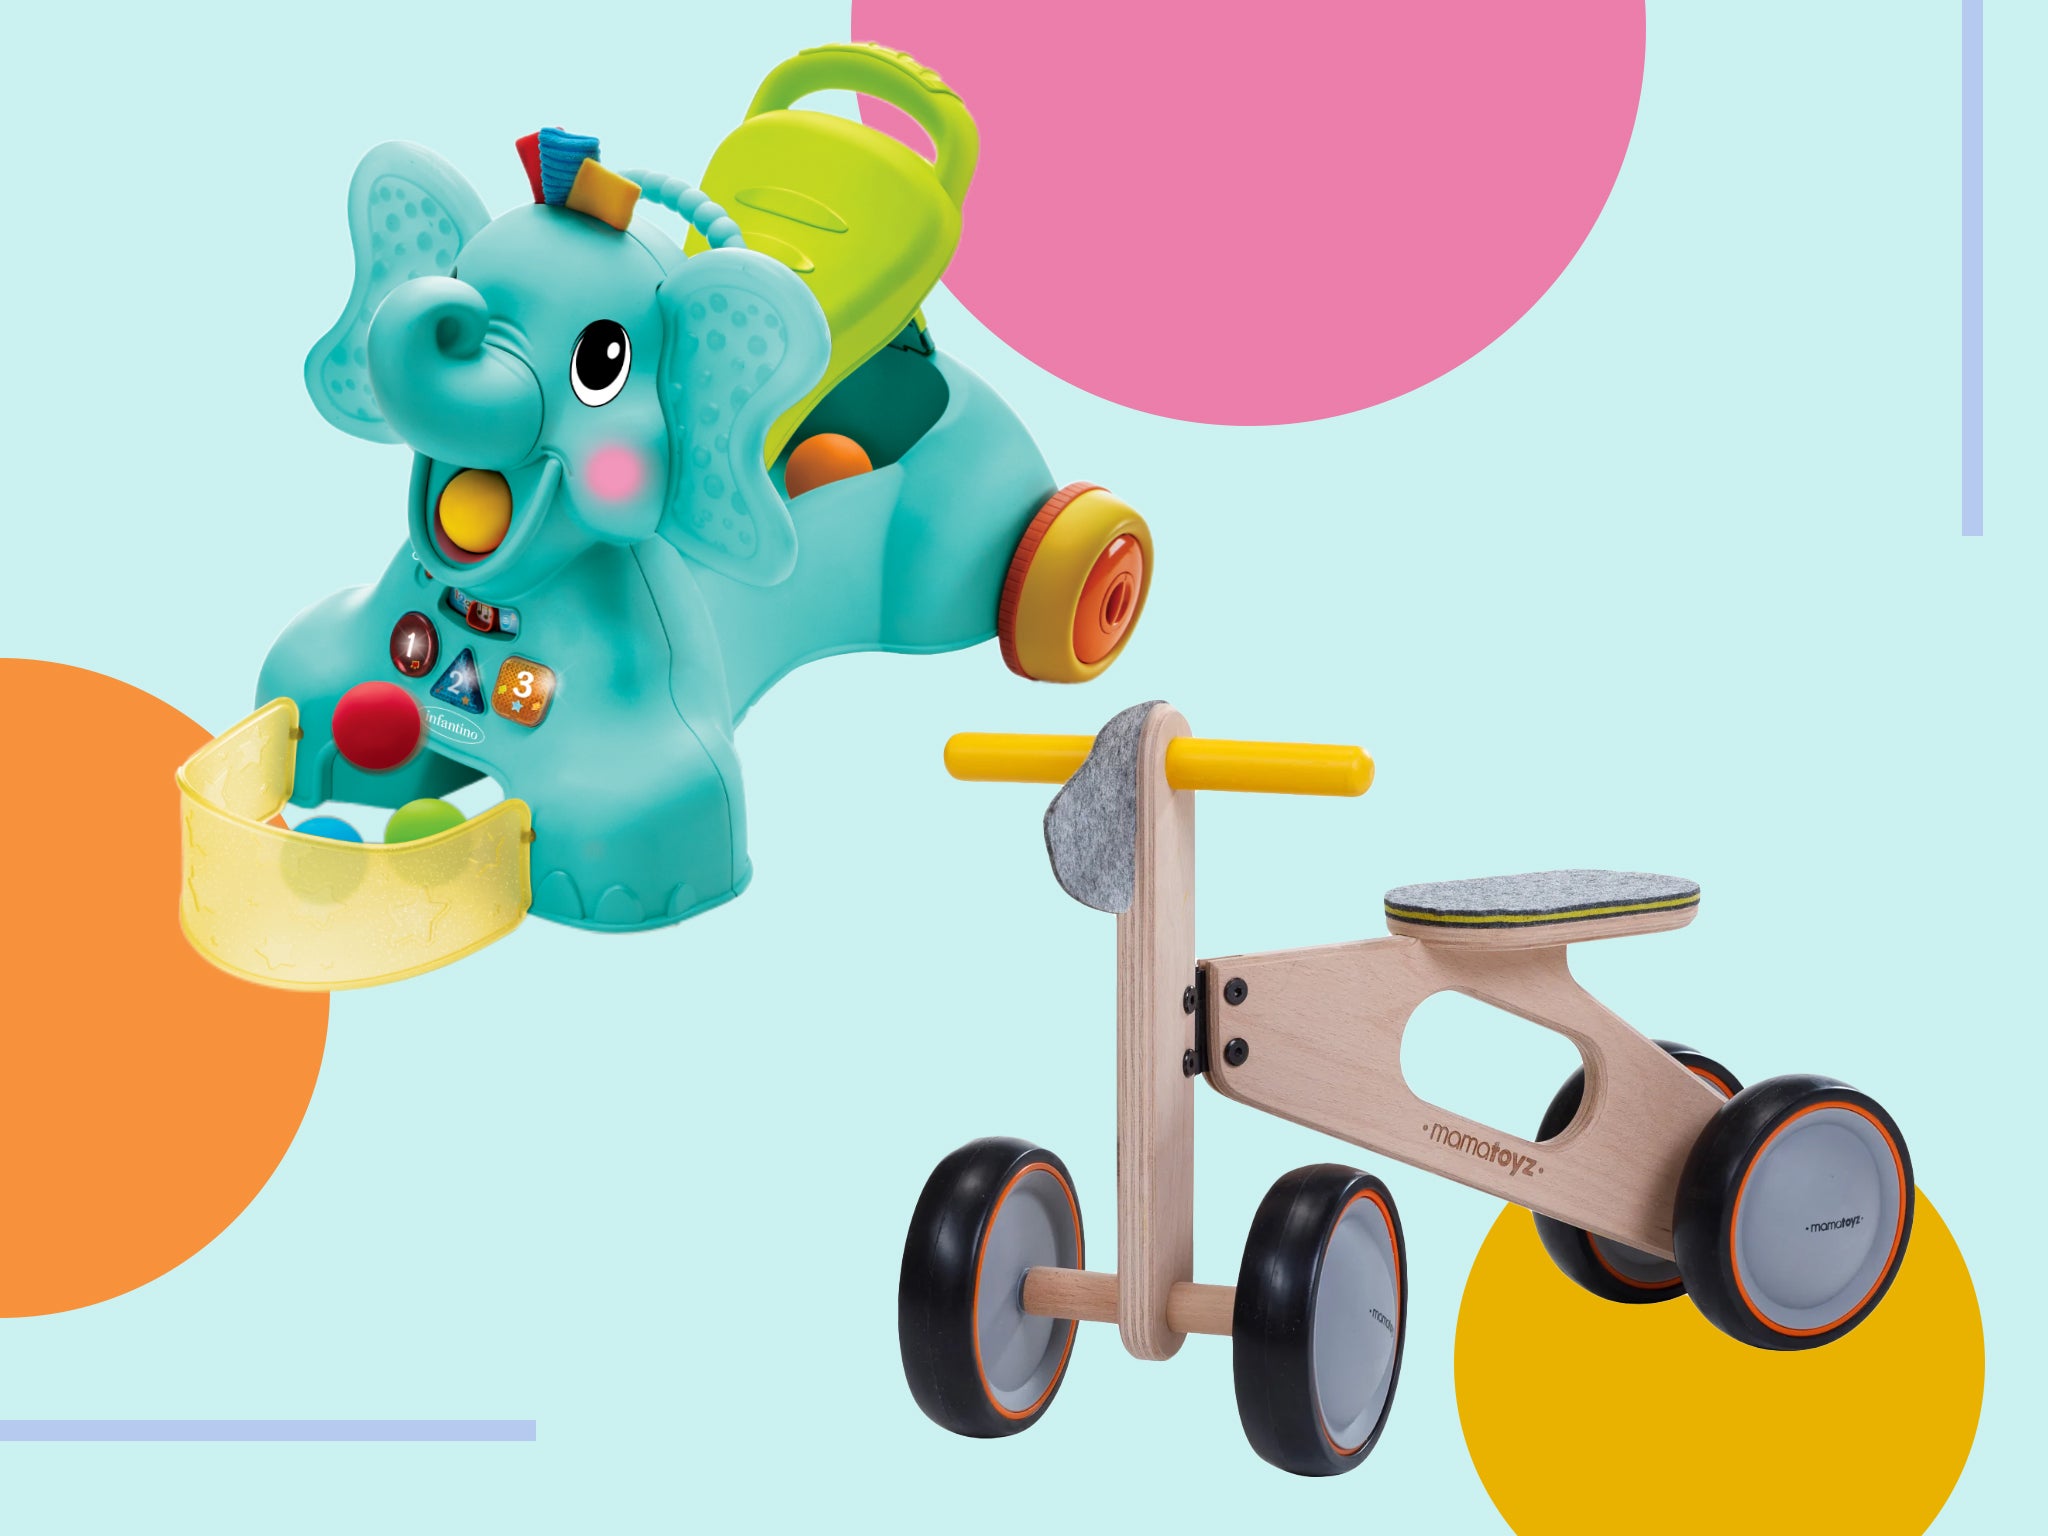 Wood toys – a safe and eco-friendly option for kids